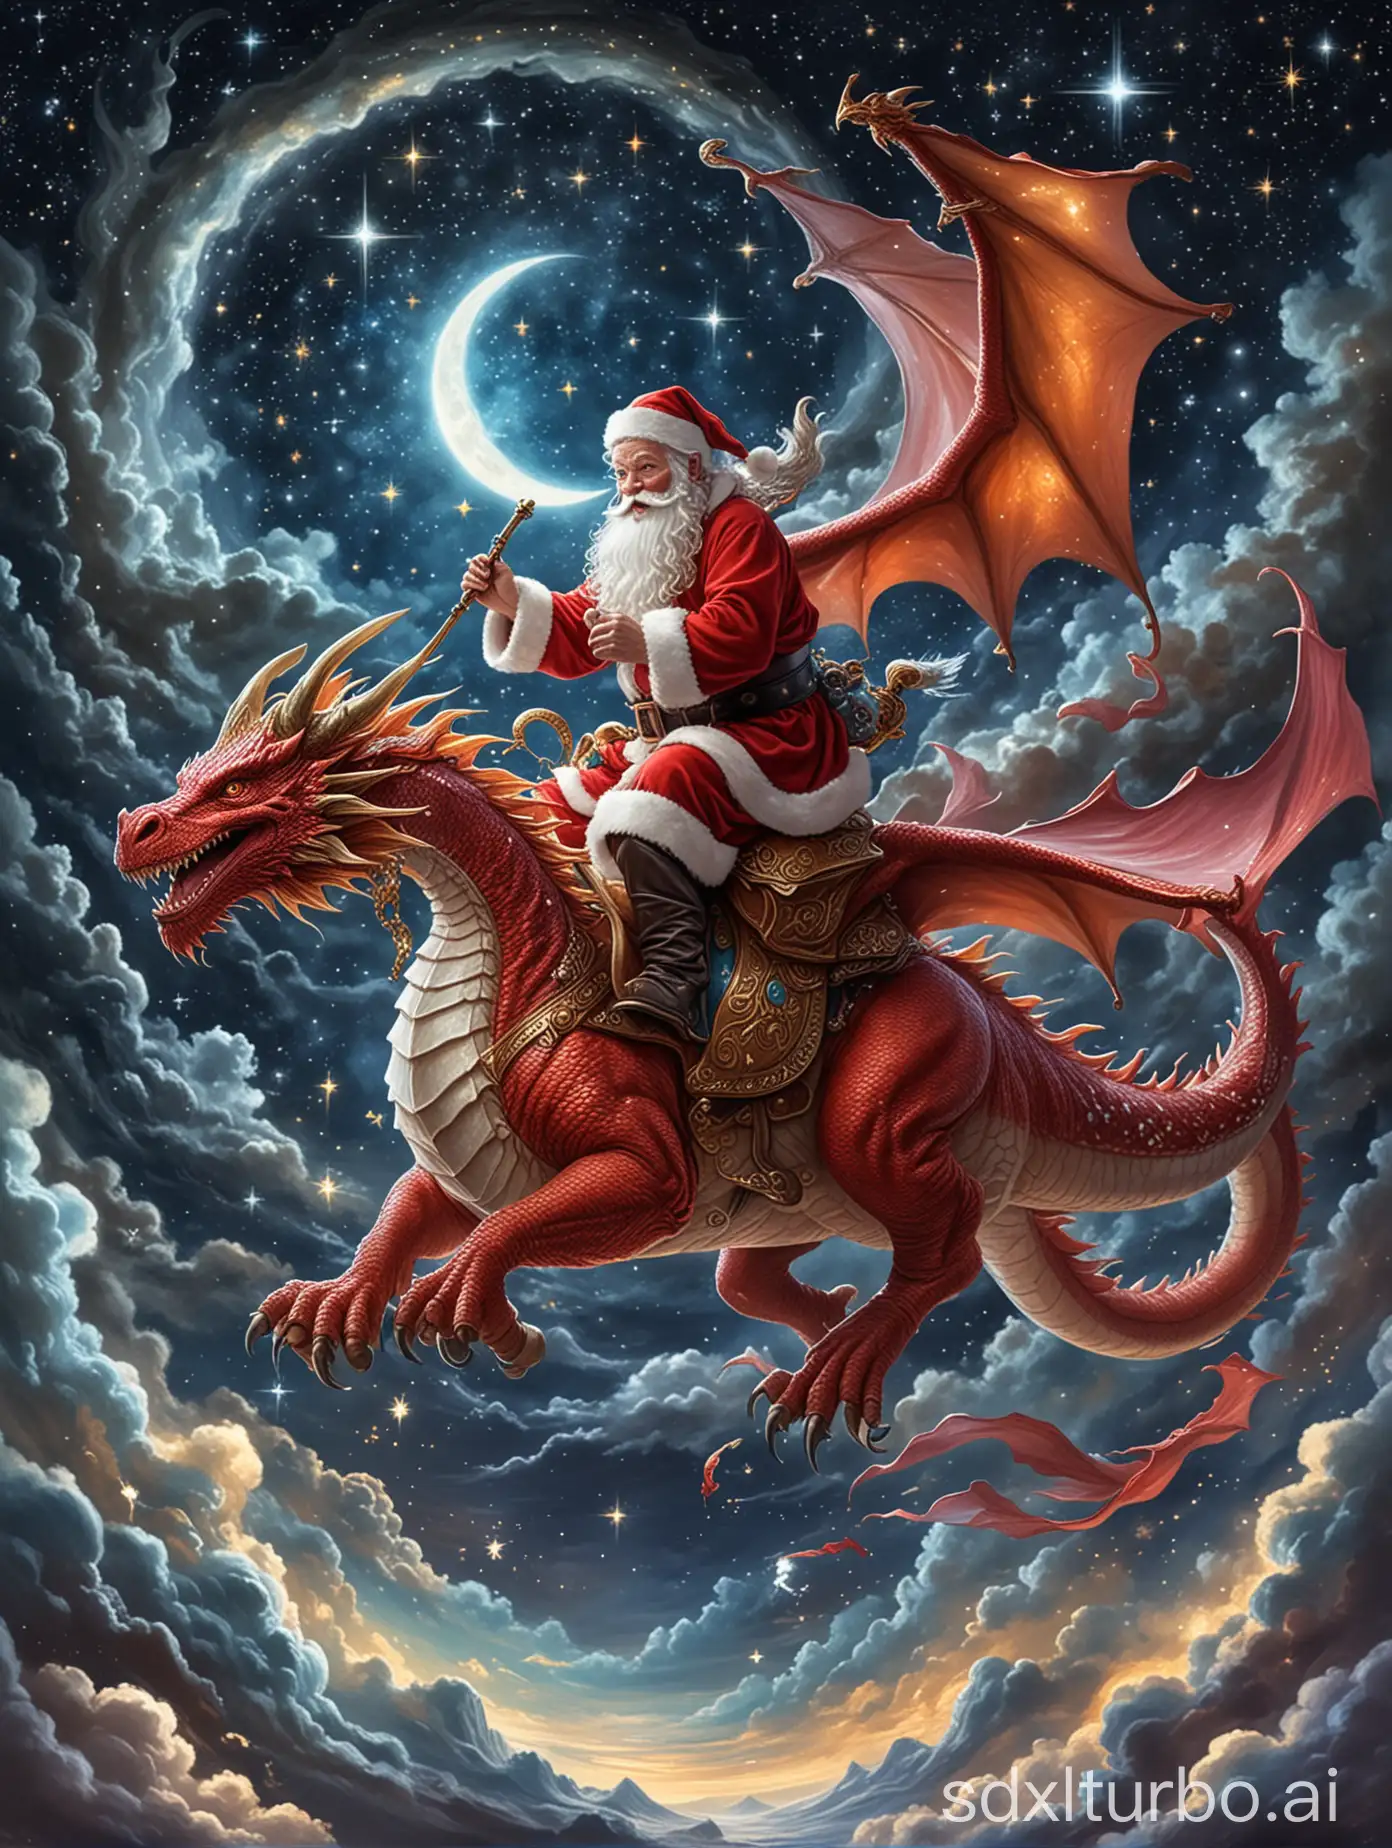 Santa, as he rides on a glittering flying dragon that carries him high into the night sky, where the stars are his only companions.